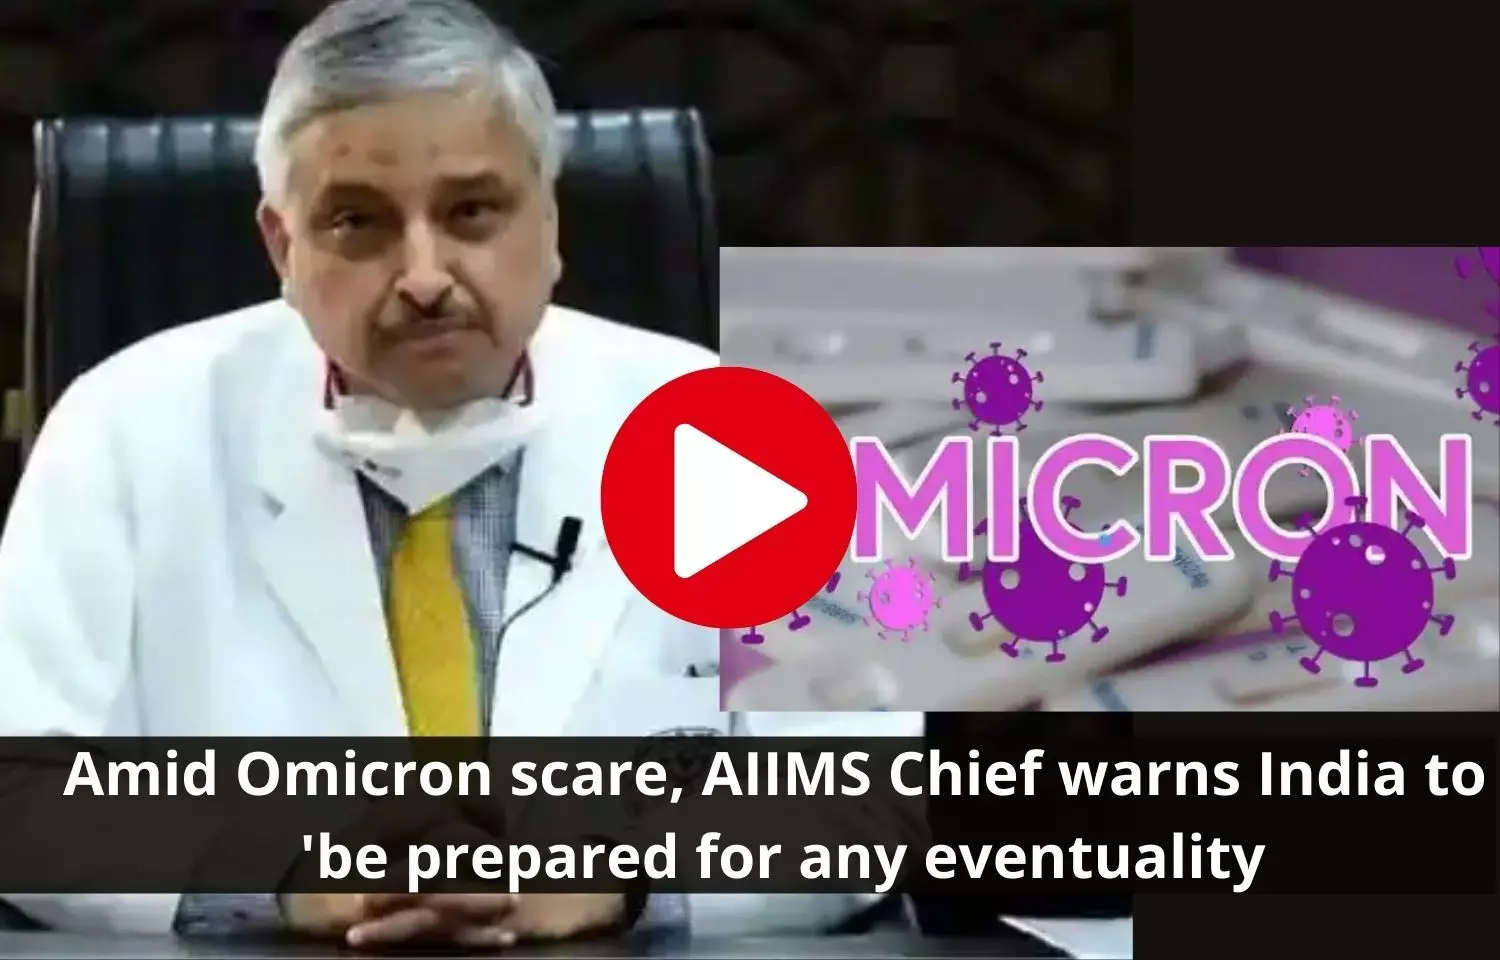 Amid Omicron scare, AIIMS Chief warns India to be prepared for any eventuality